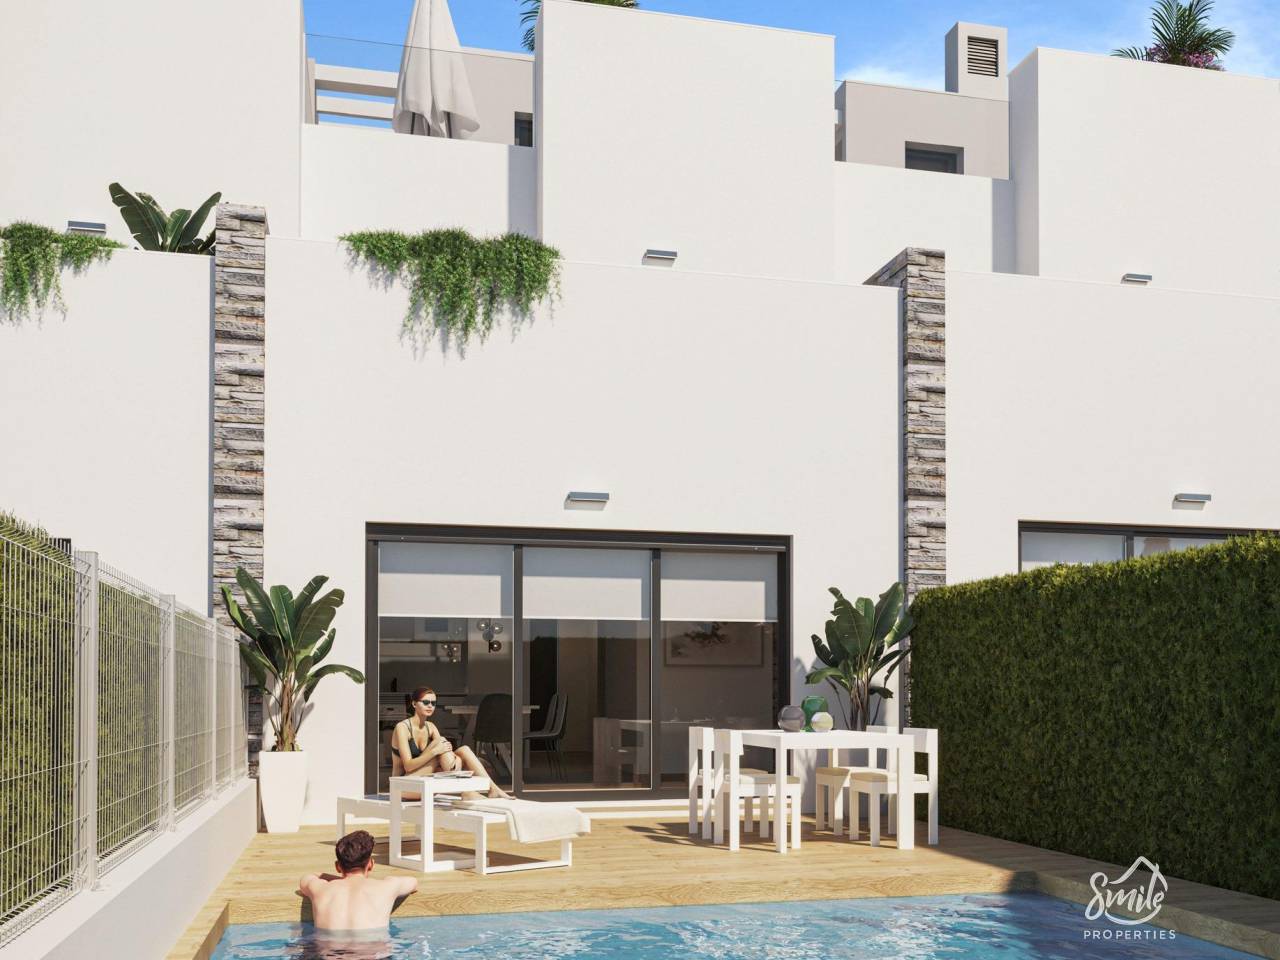  - New Build - Torrevieja - Los Angeles